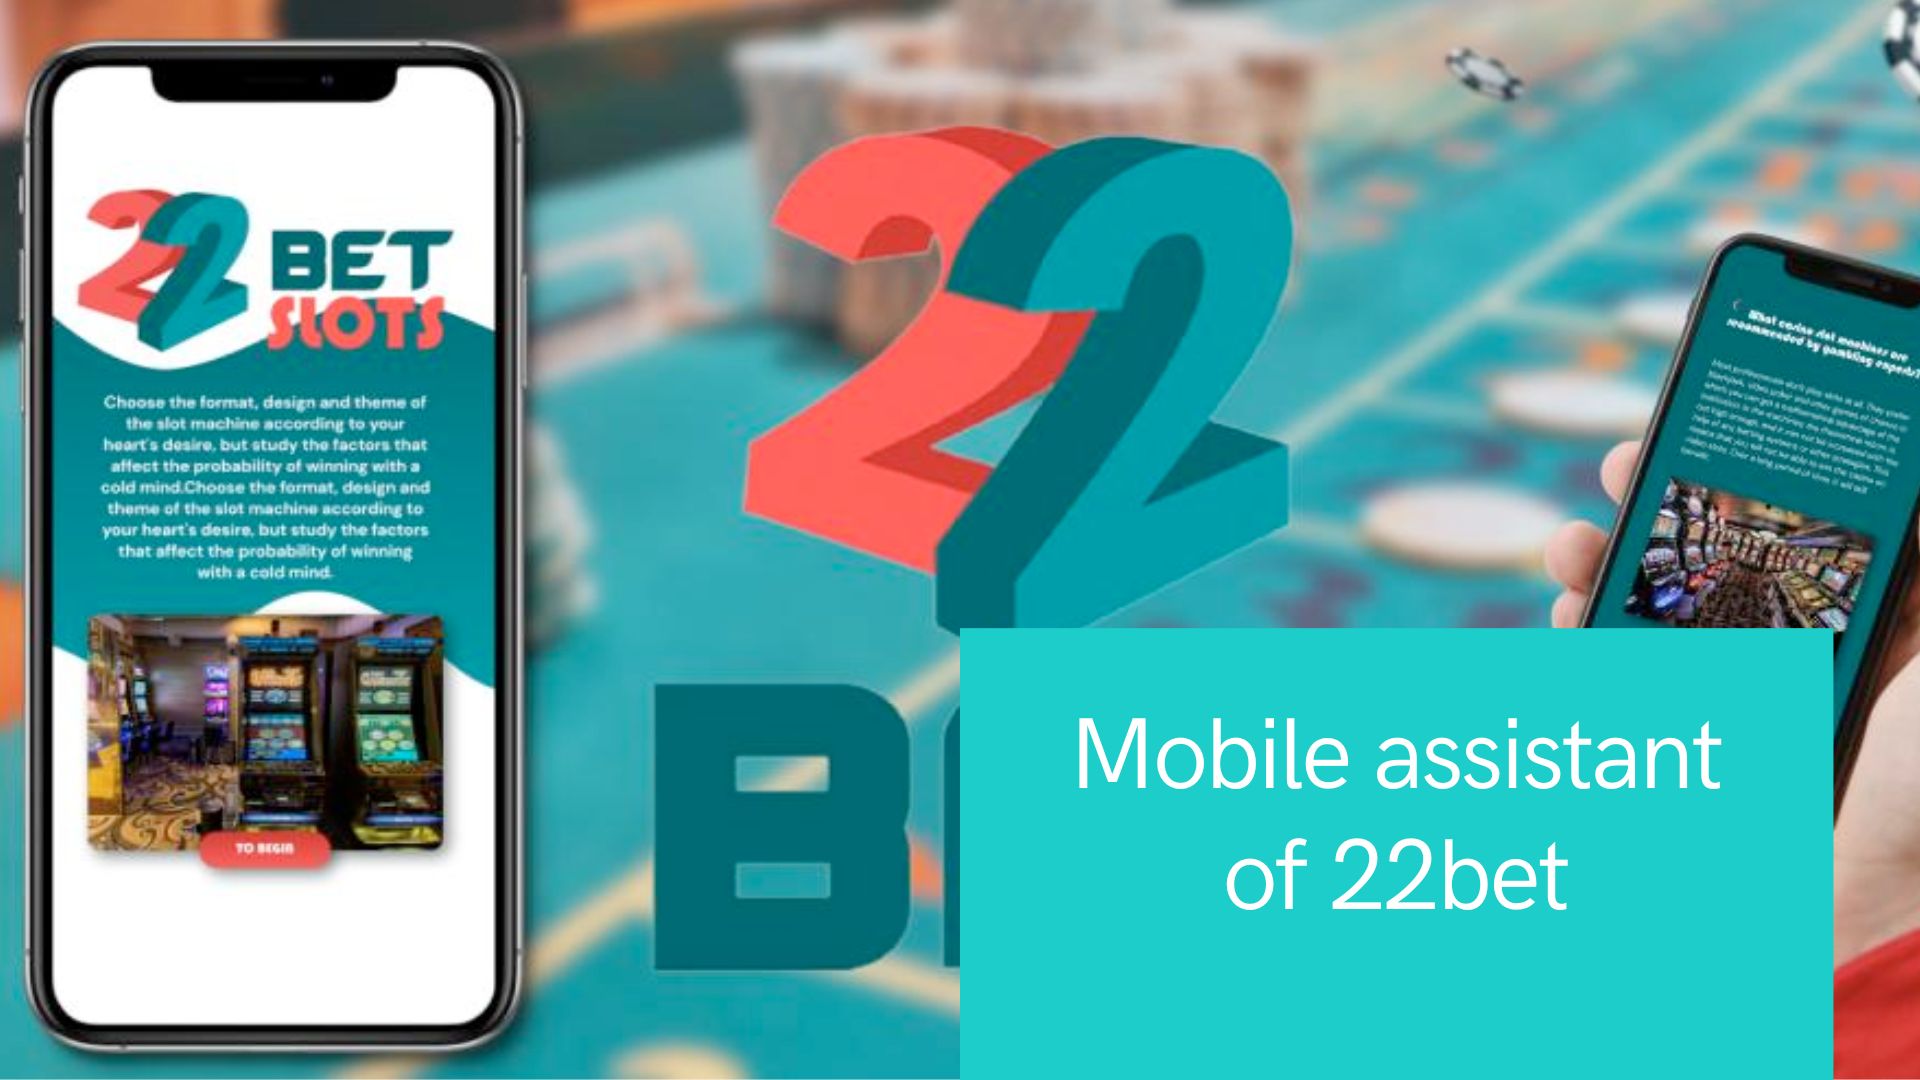 Mobile assistant of 22bet